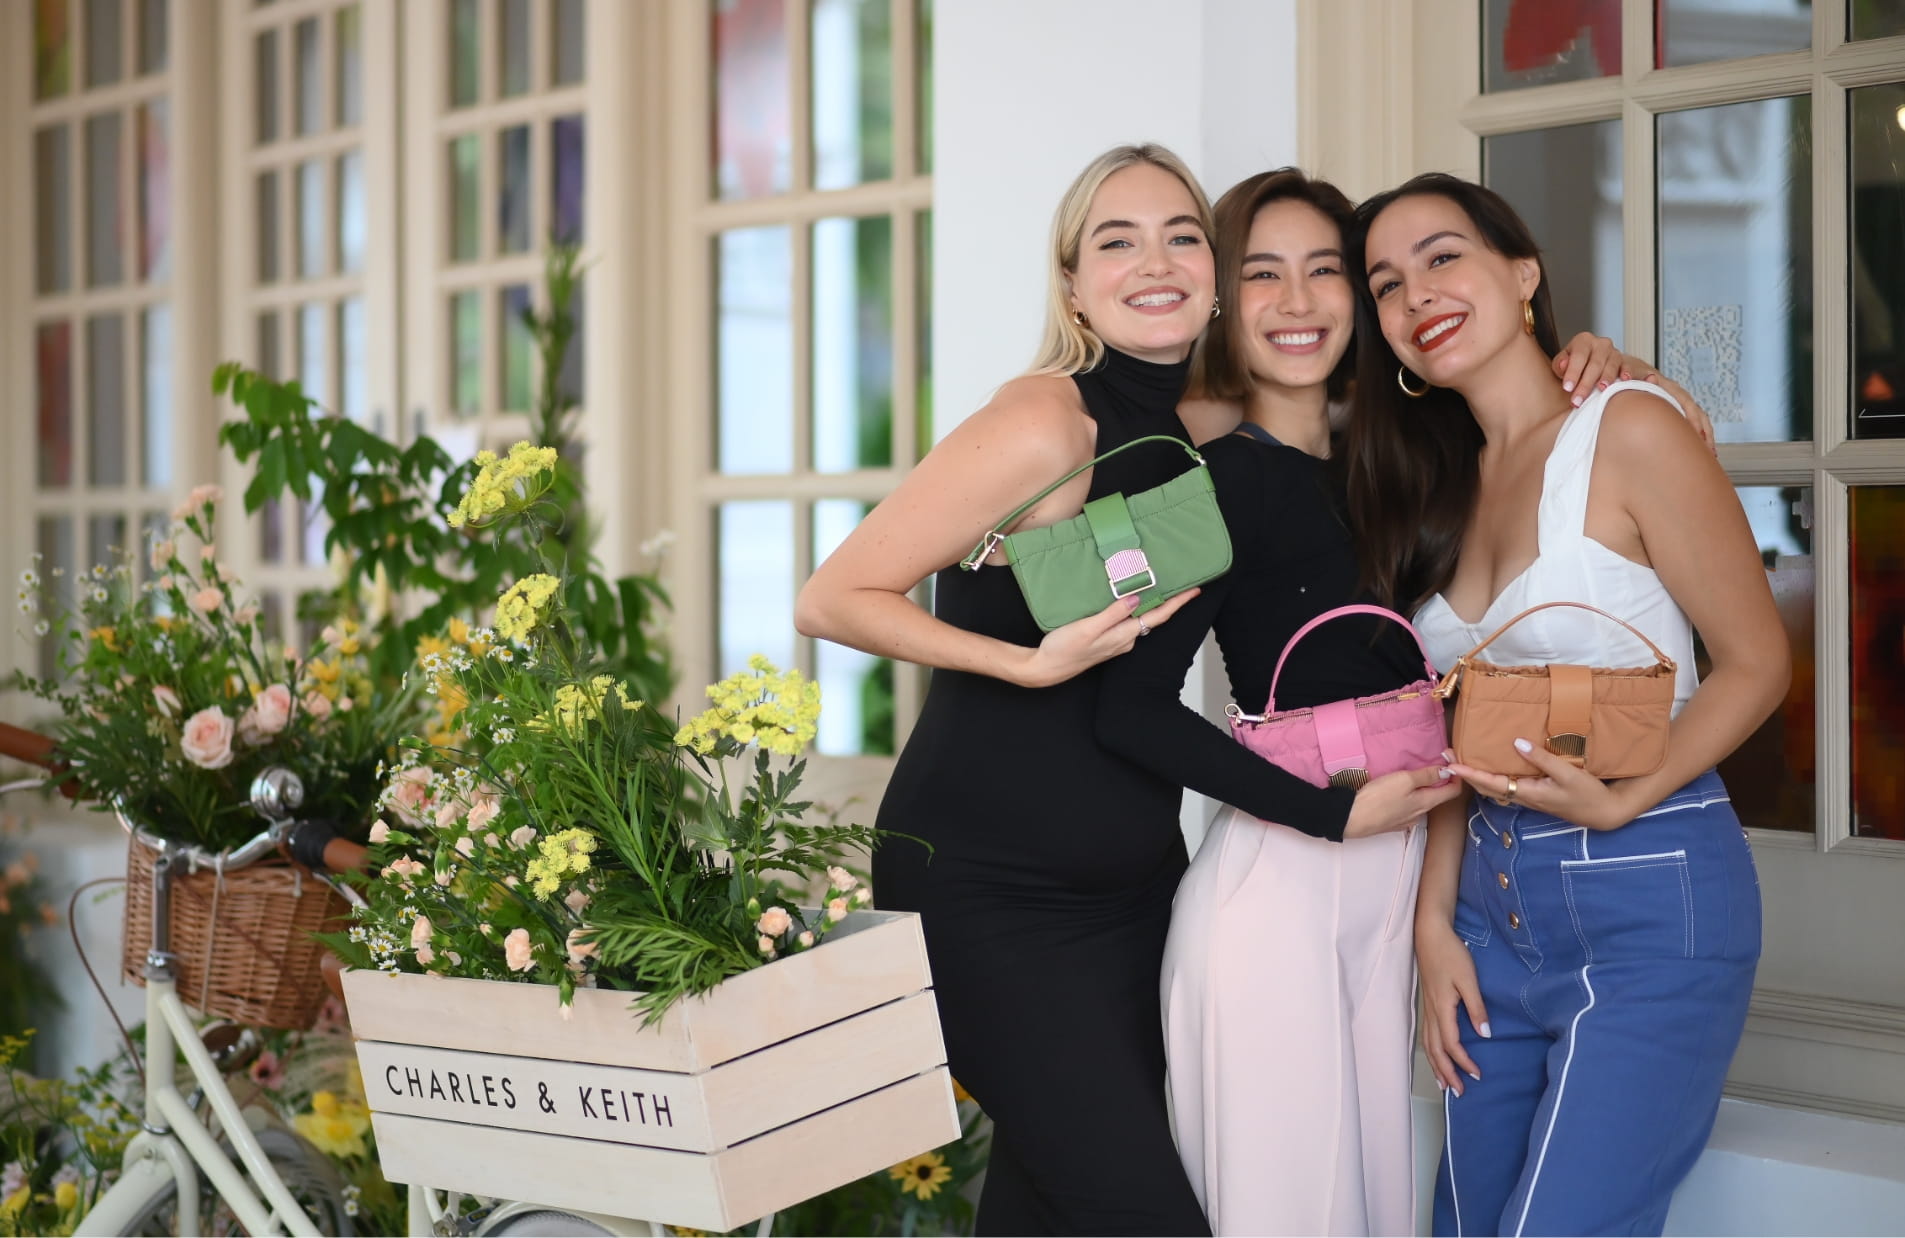 Aspen ruched phone pouch, as seen on Brie Benfall, Bernadette Belle Ong, and Ming Bridges - CHARLES & KEITH